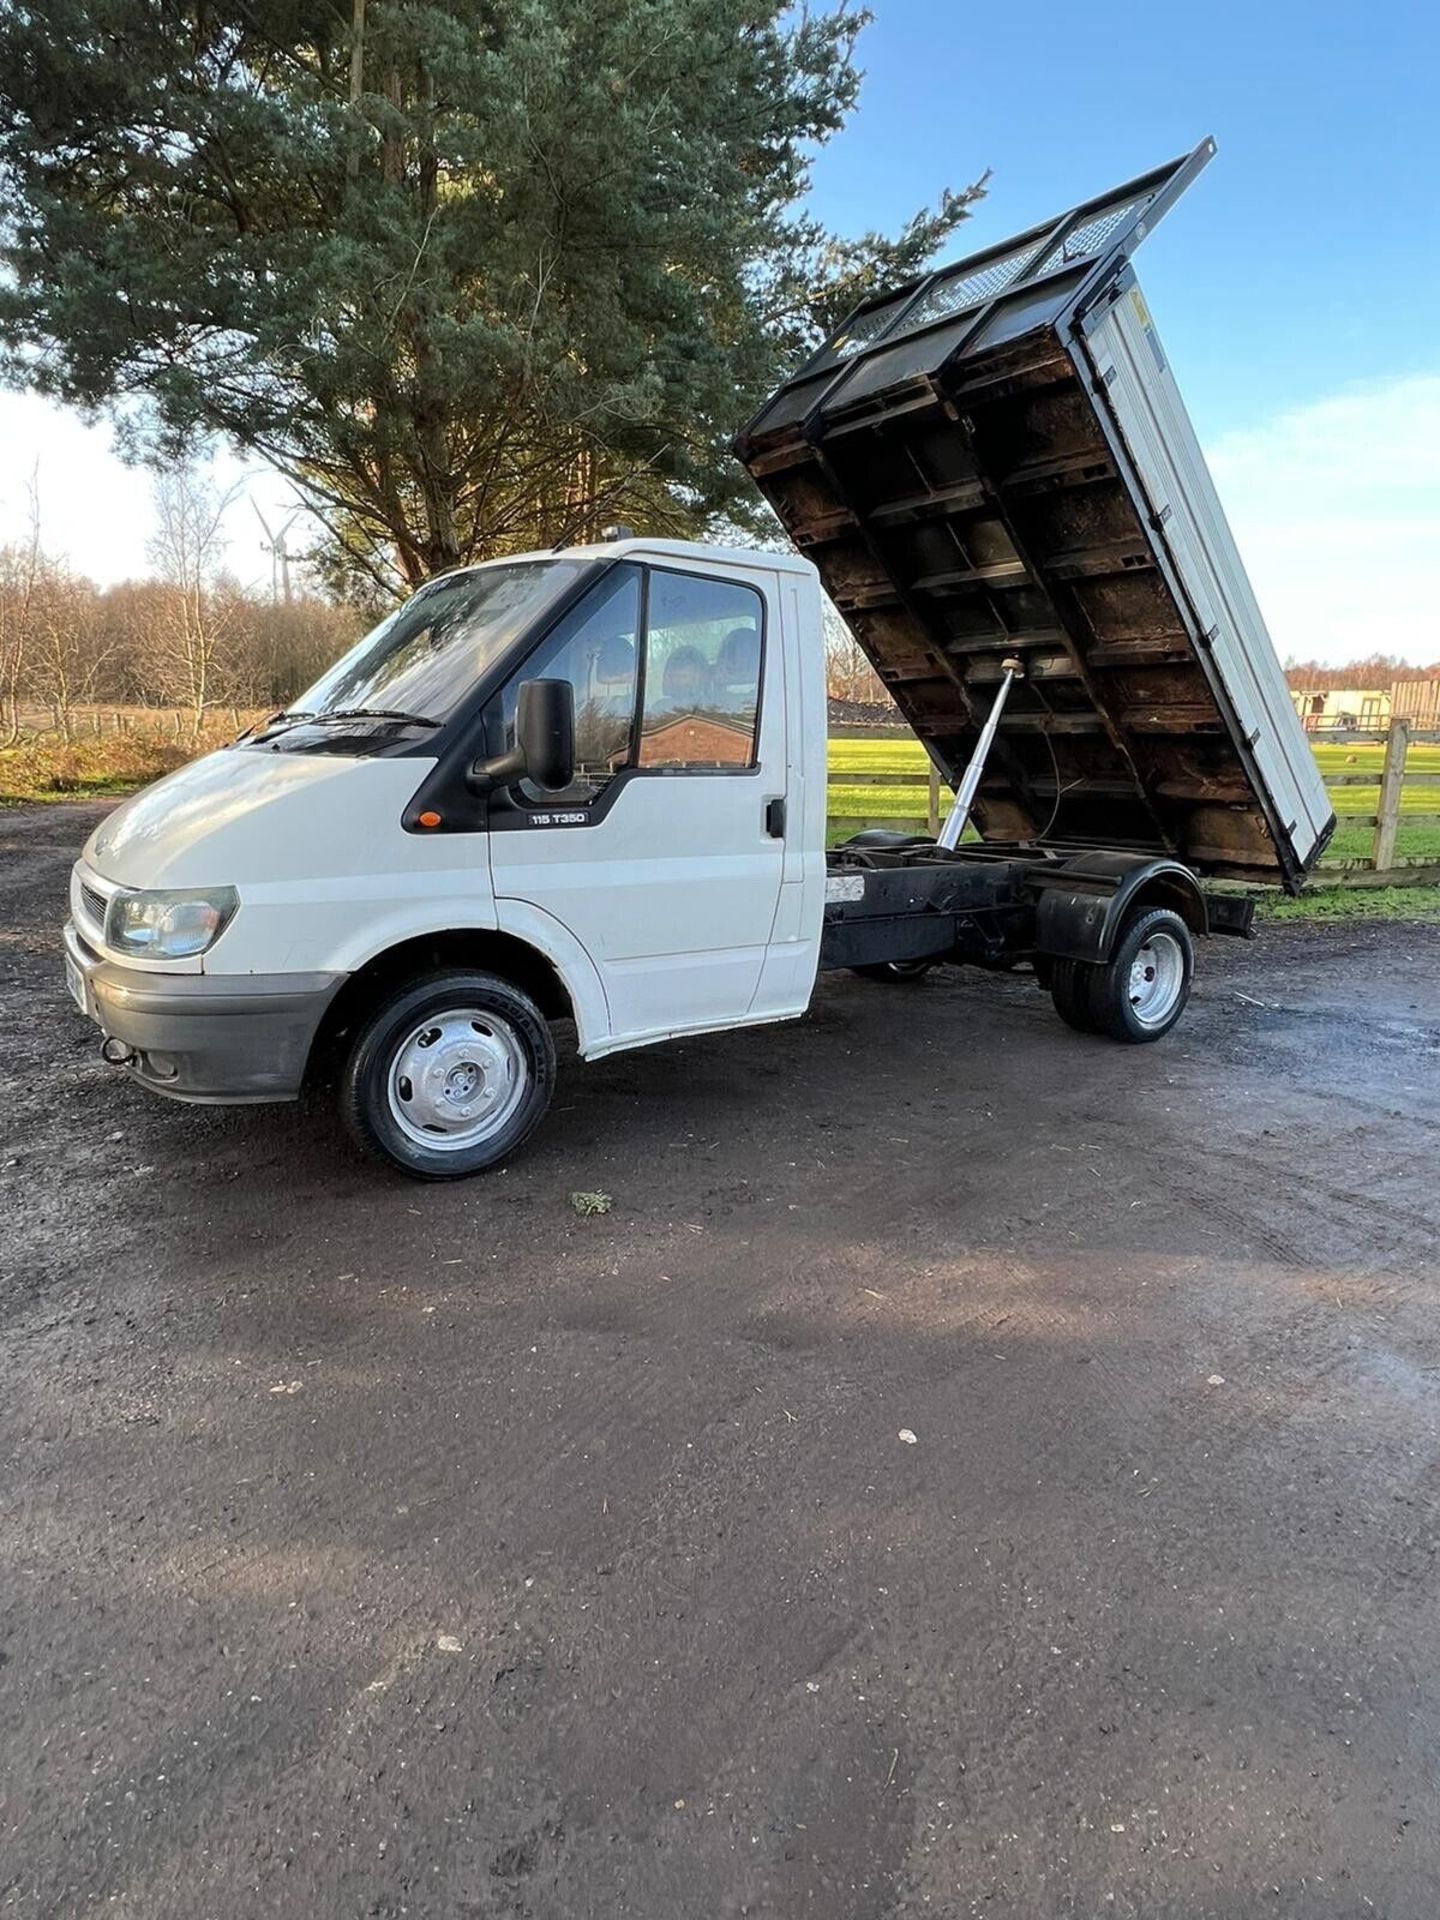 FORD TRANSIT TIPPER LORRY TWIN WHEEL TIPPING TRUCK LONG TEST MANUAL 120K 2006 - Image 10 of 14